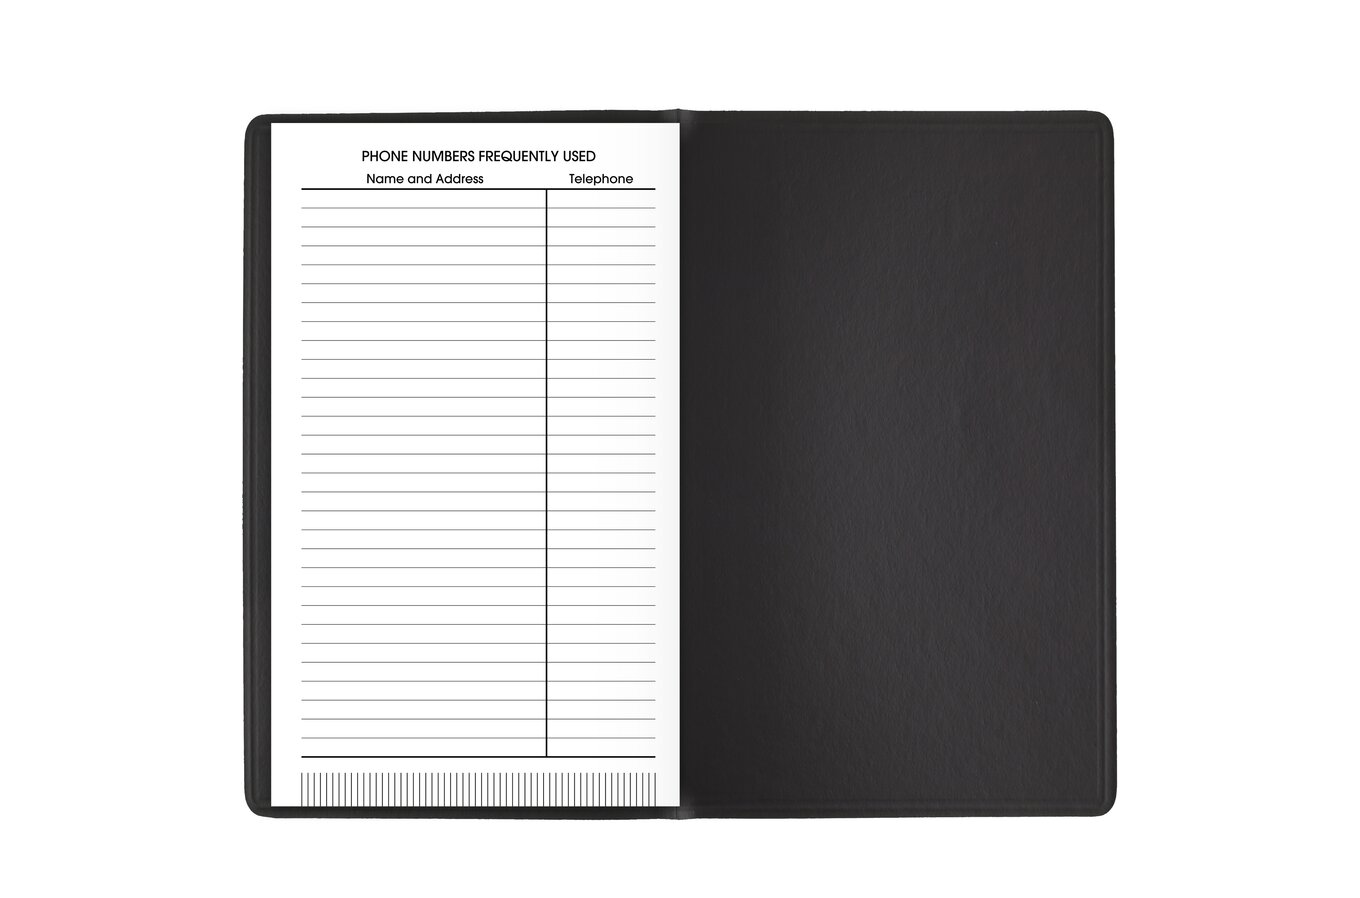 AT-A-GLANCE® Pocket-Size Monthly Planner